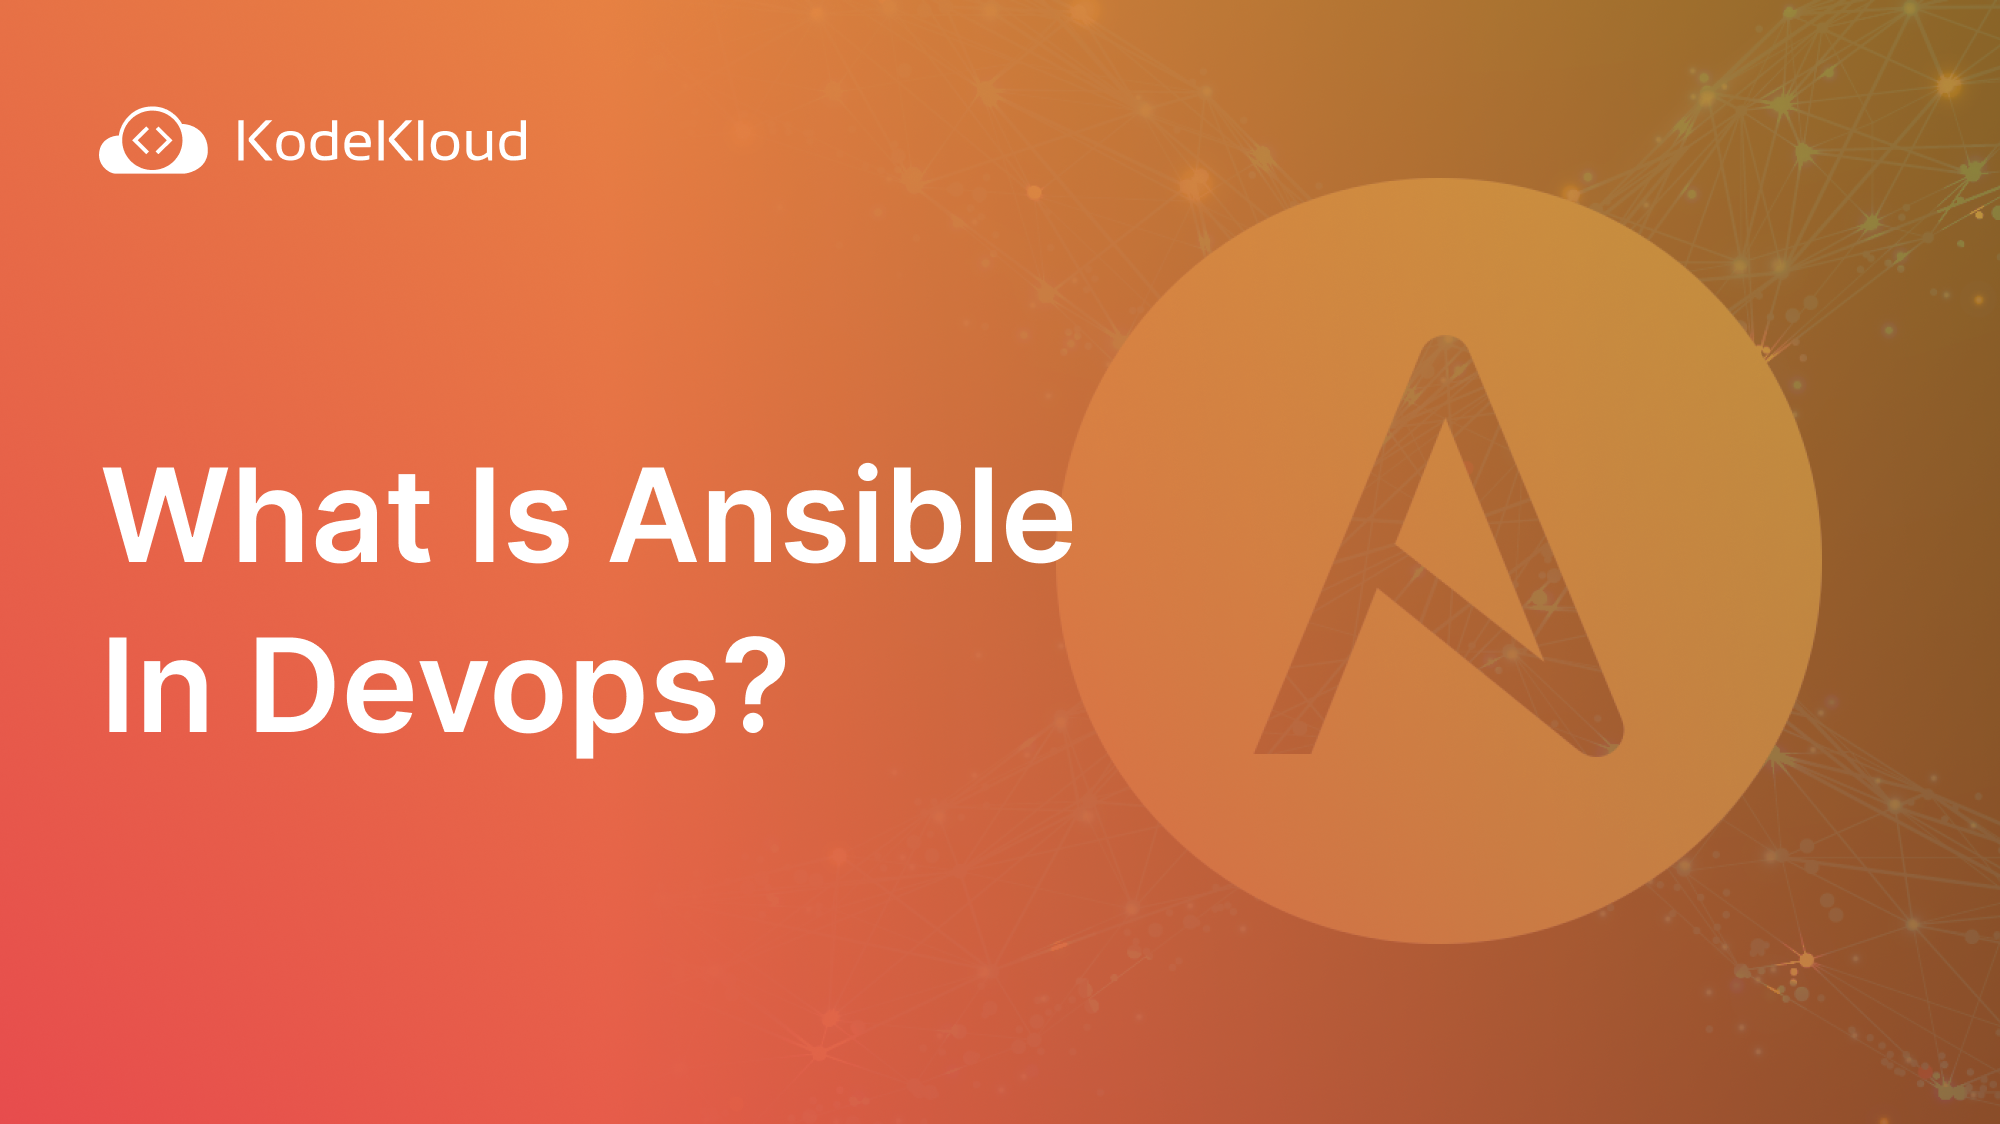 What is Ansible in DevOps